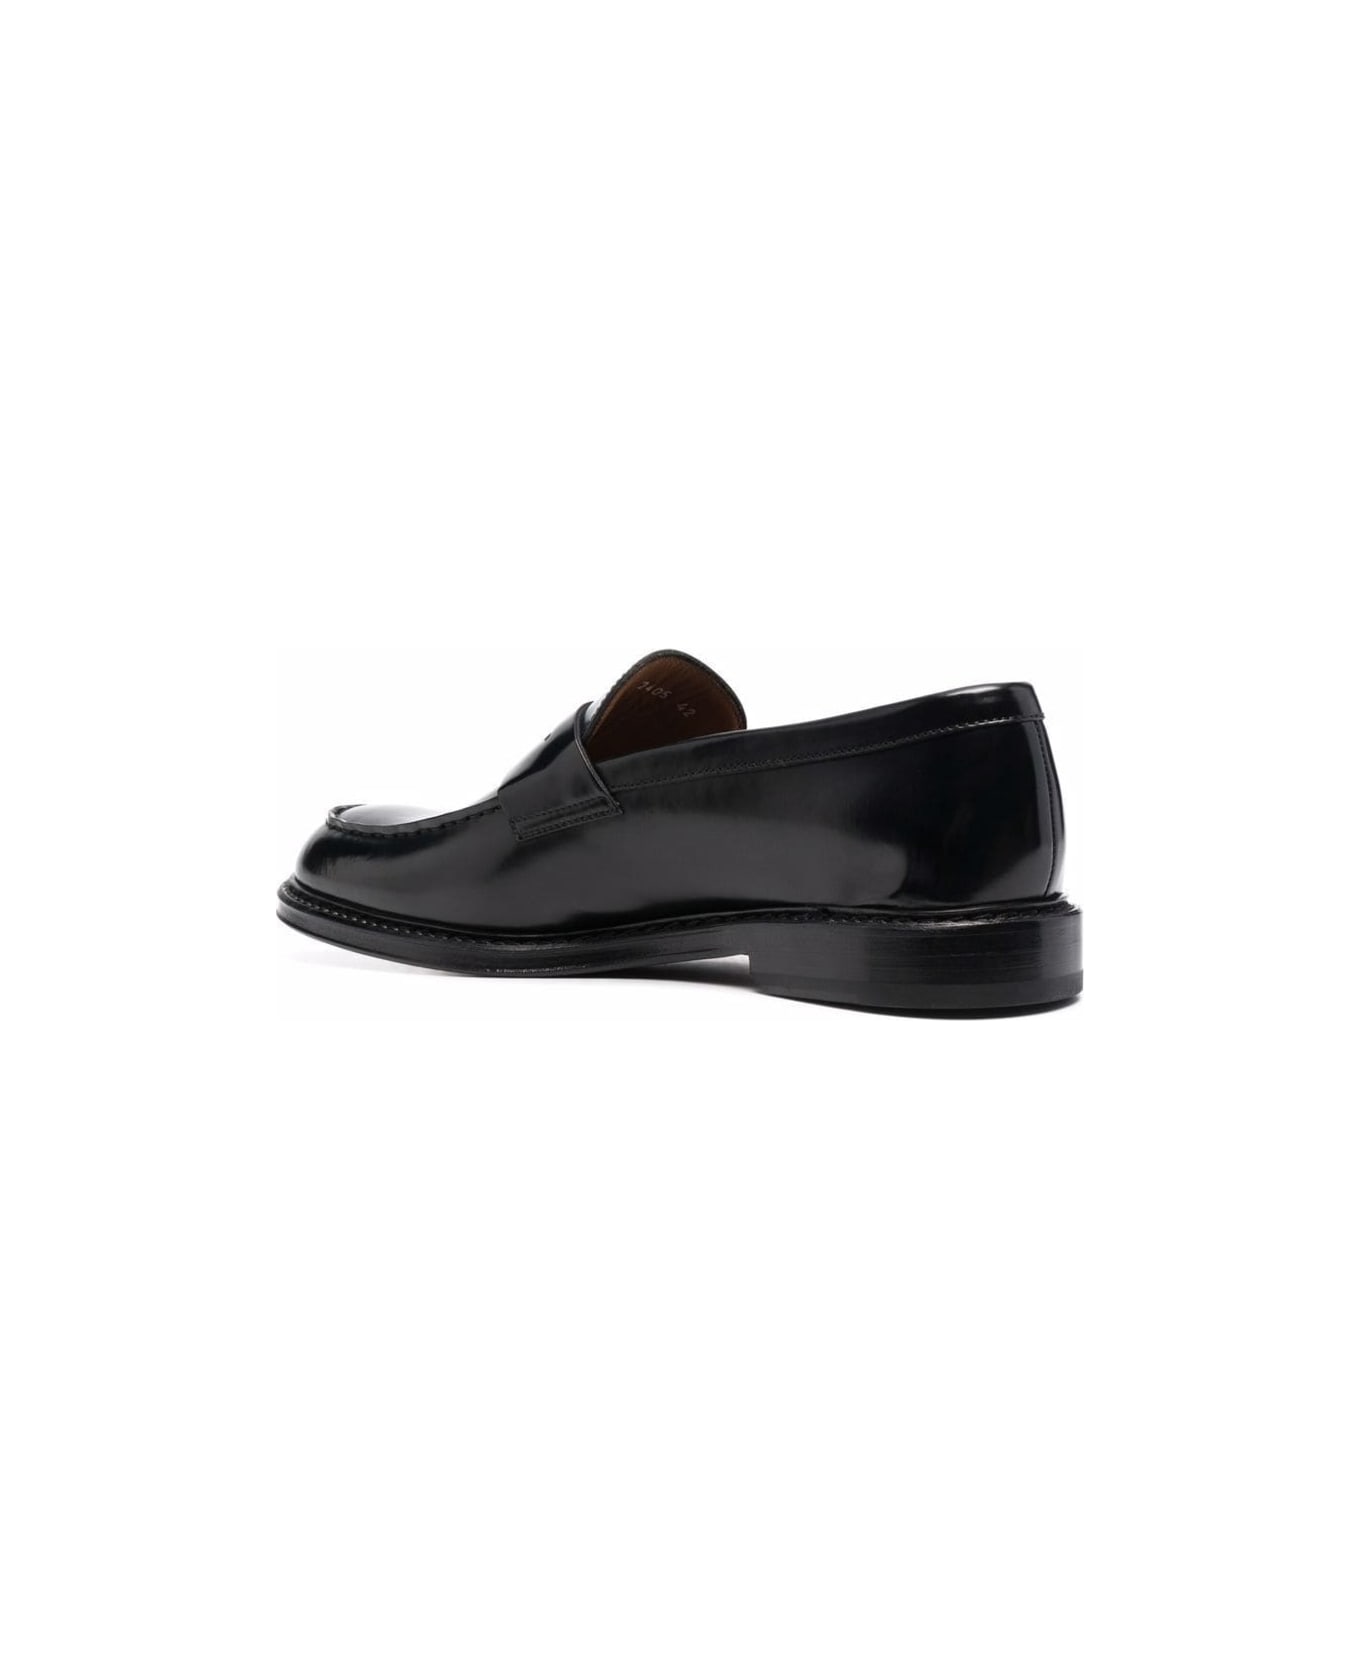 Doucal's Black Slip-on Loafers With Round Toe In Patent Leather Man - Nero